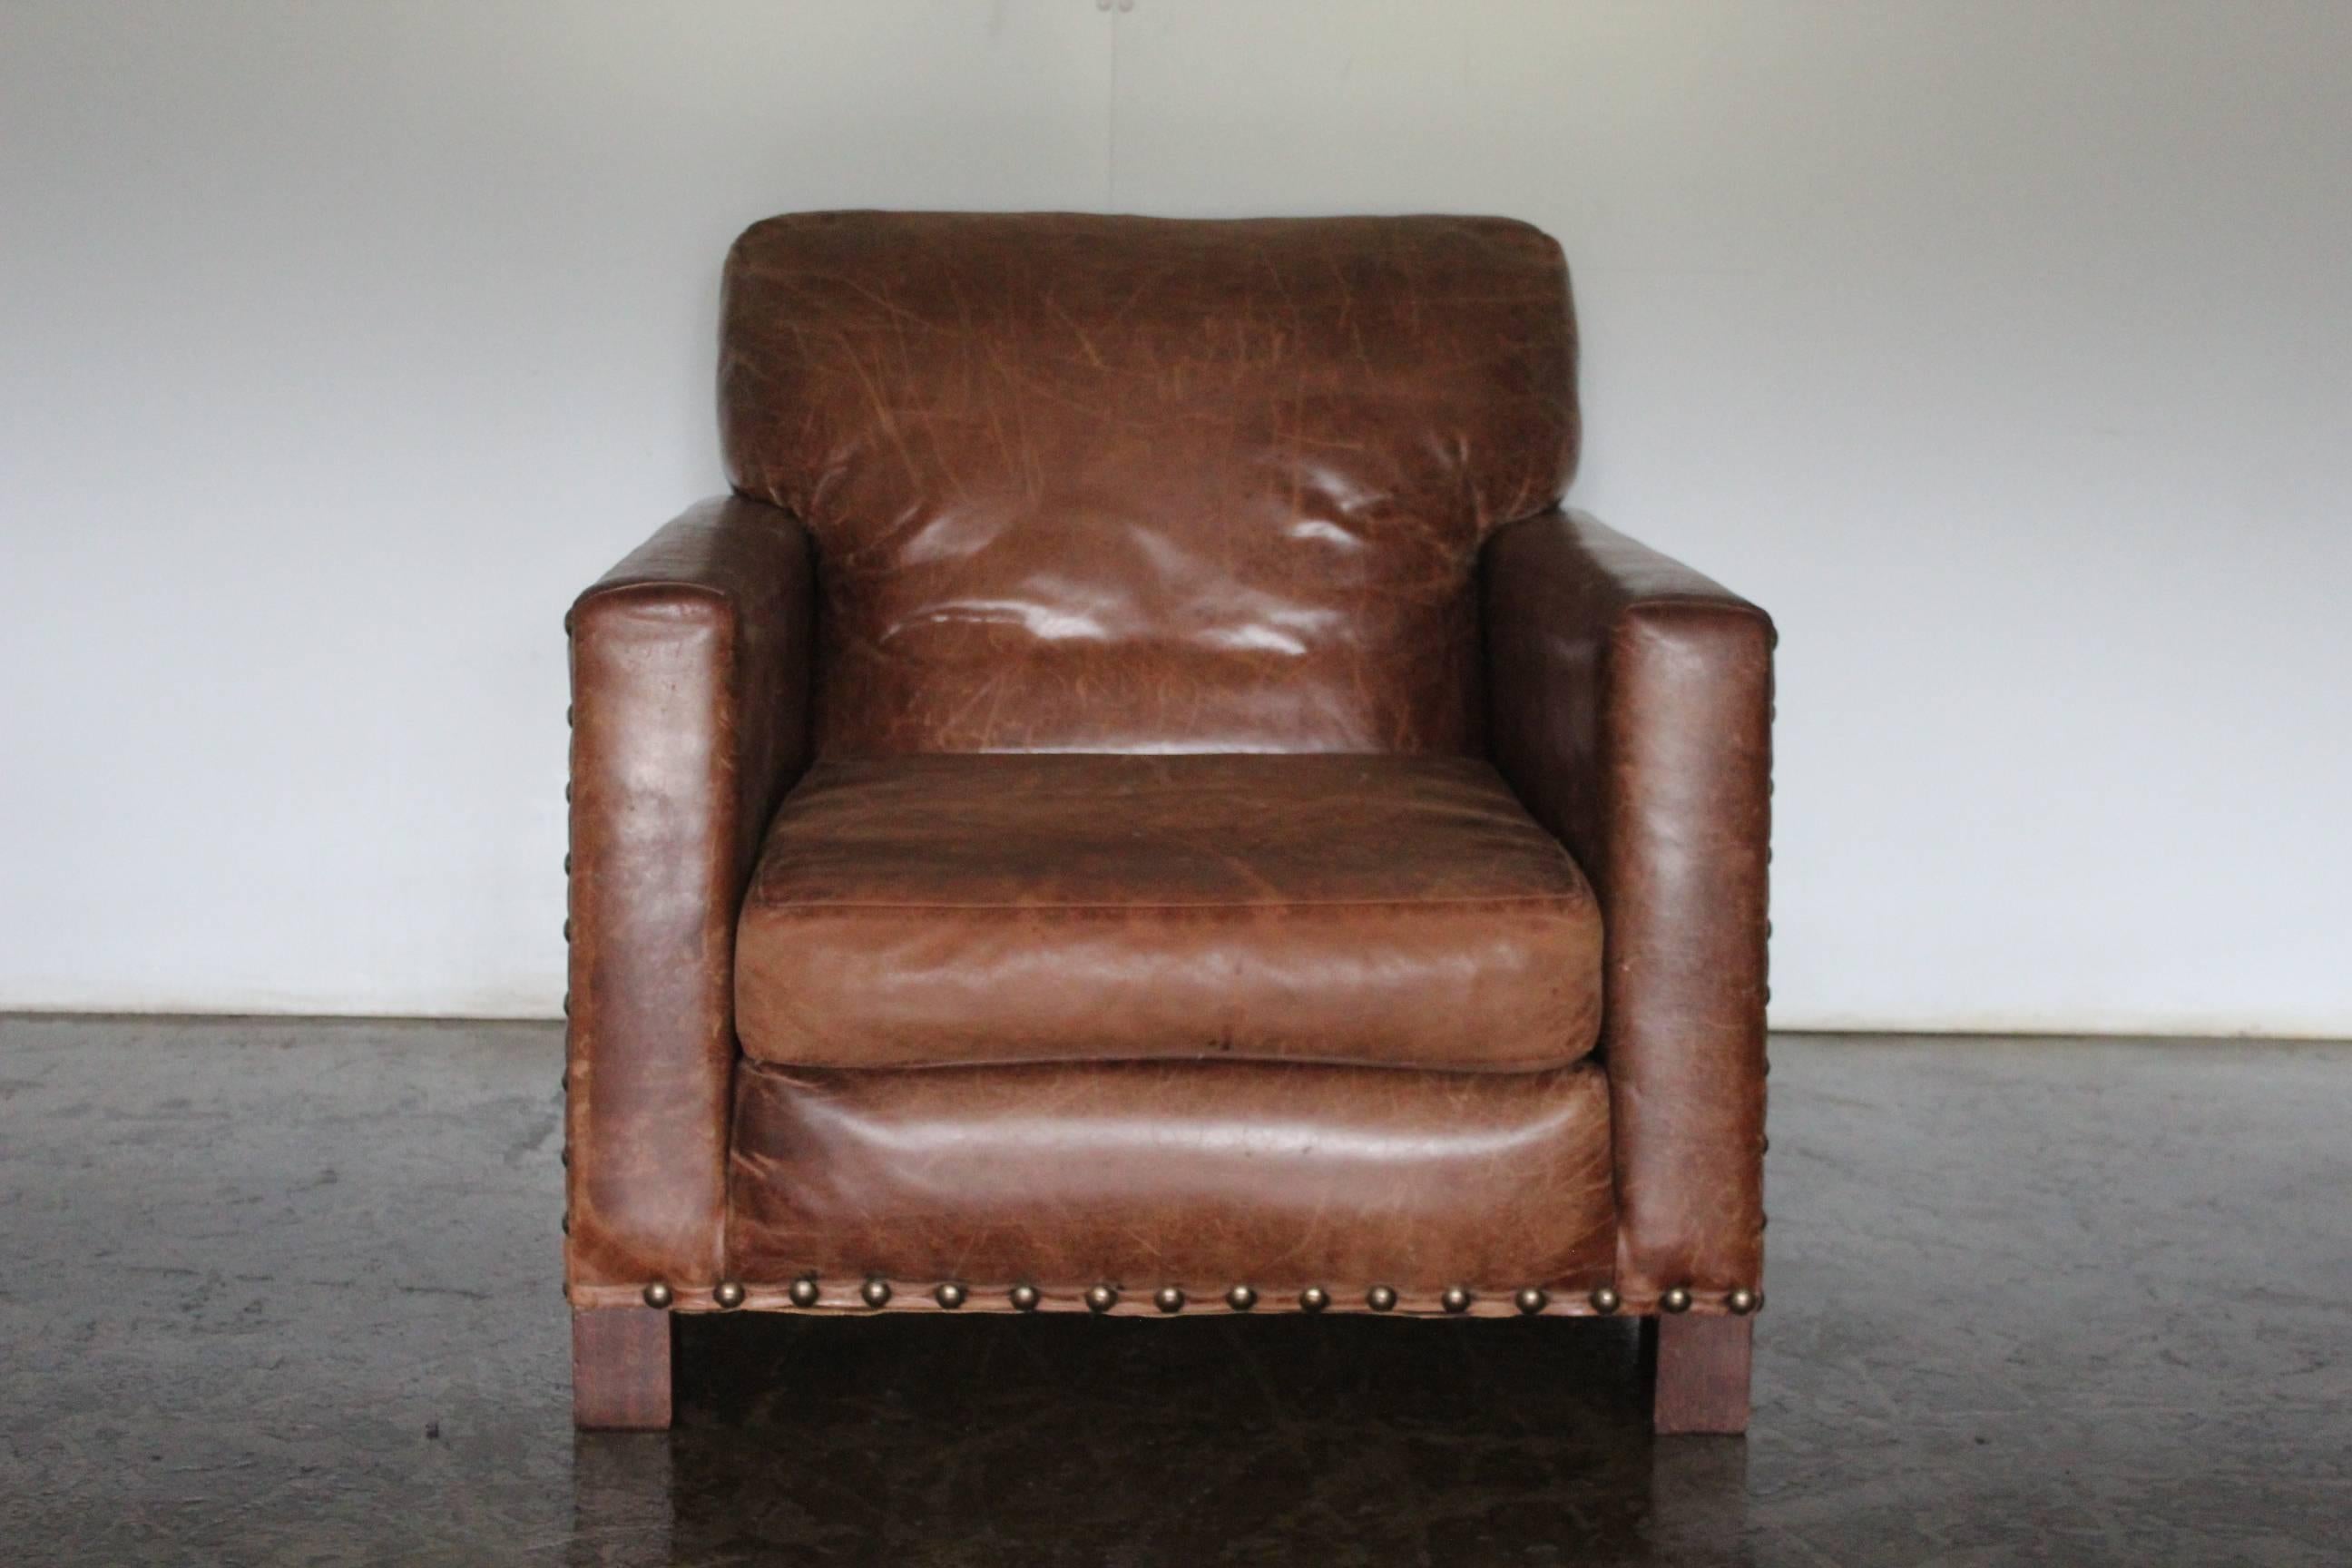 On offer on this occasion is an incredibly rare, and beautifully-presented Ralph Lauren “Club” chair and ottoman, dressed in a peerless top-grade brown Regency leather and with antiqued-brass nailhead detail.

As you will no doubt be aware by your